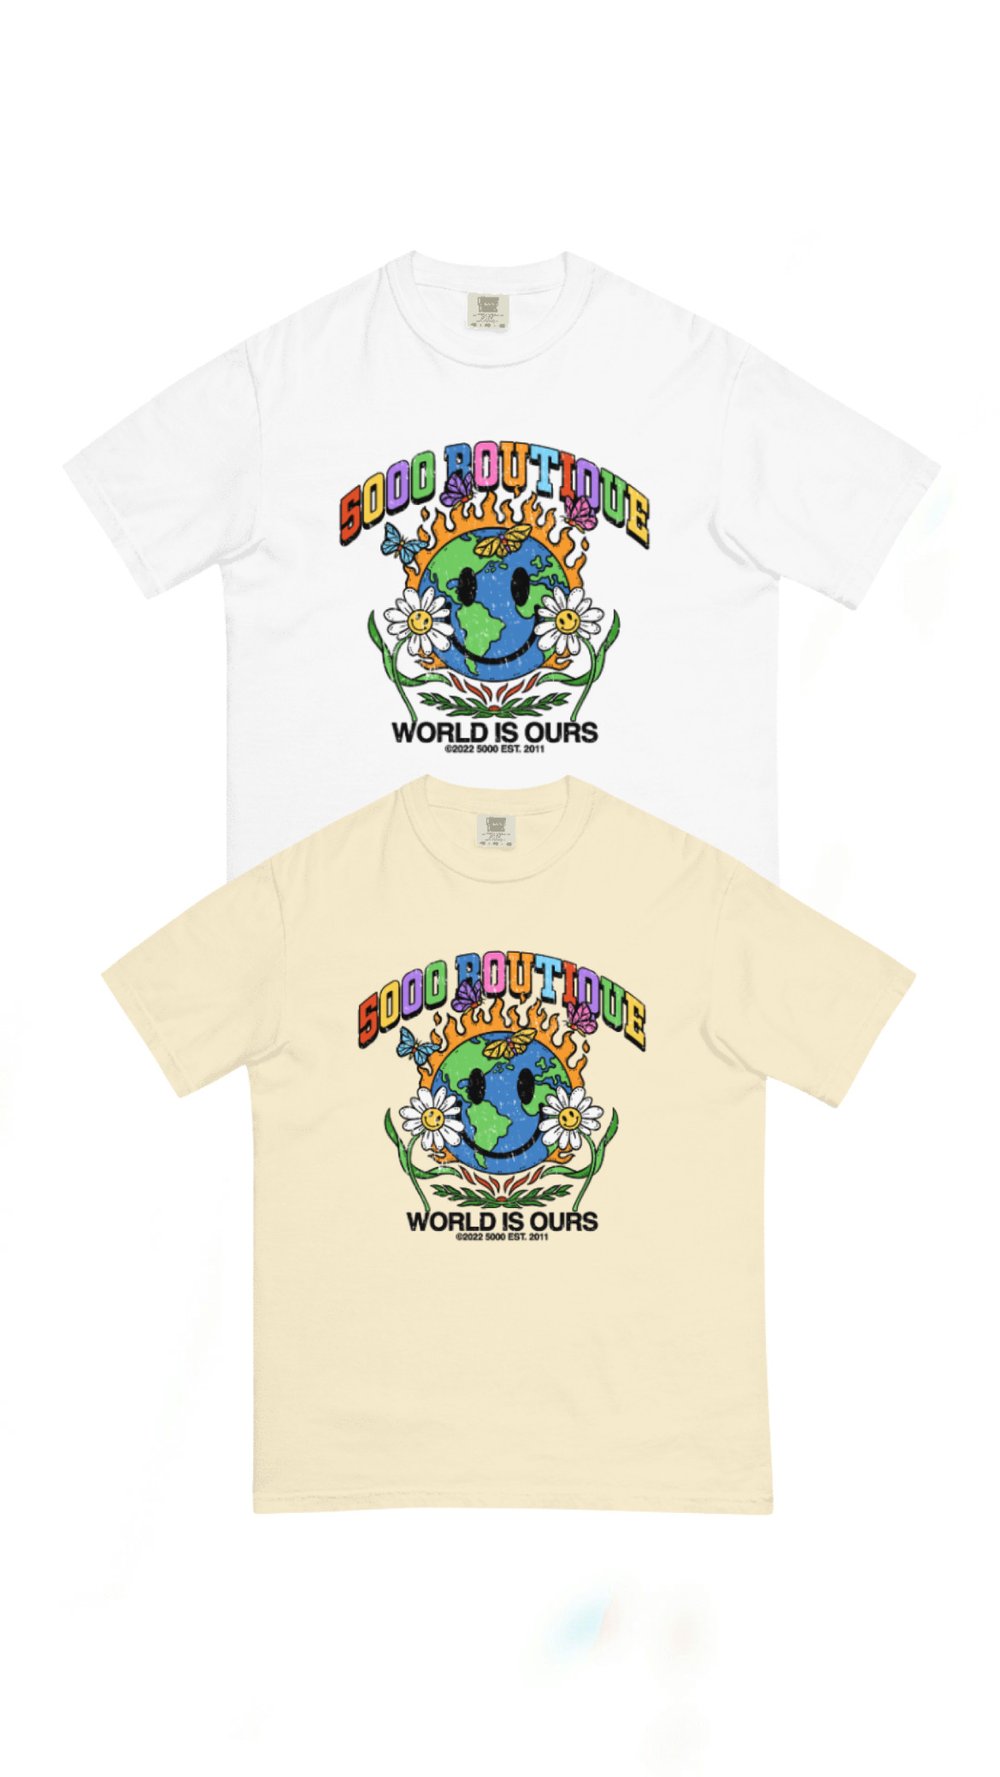 Image of "World is Ours" Unisex garment-dyed heavyweight t-shirt